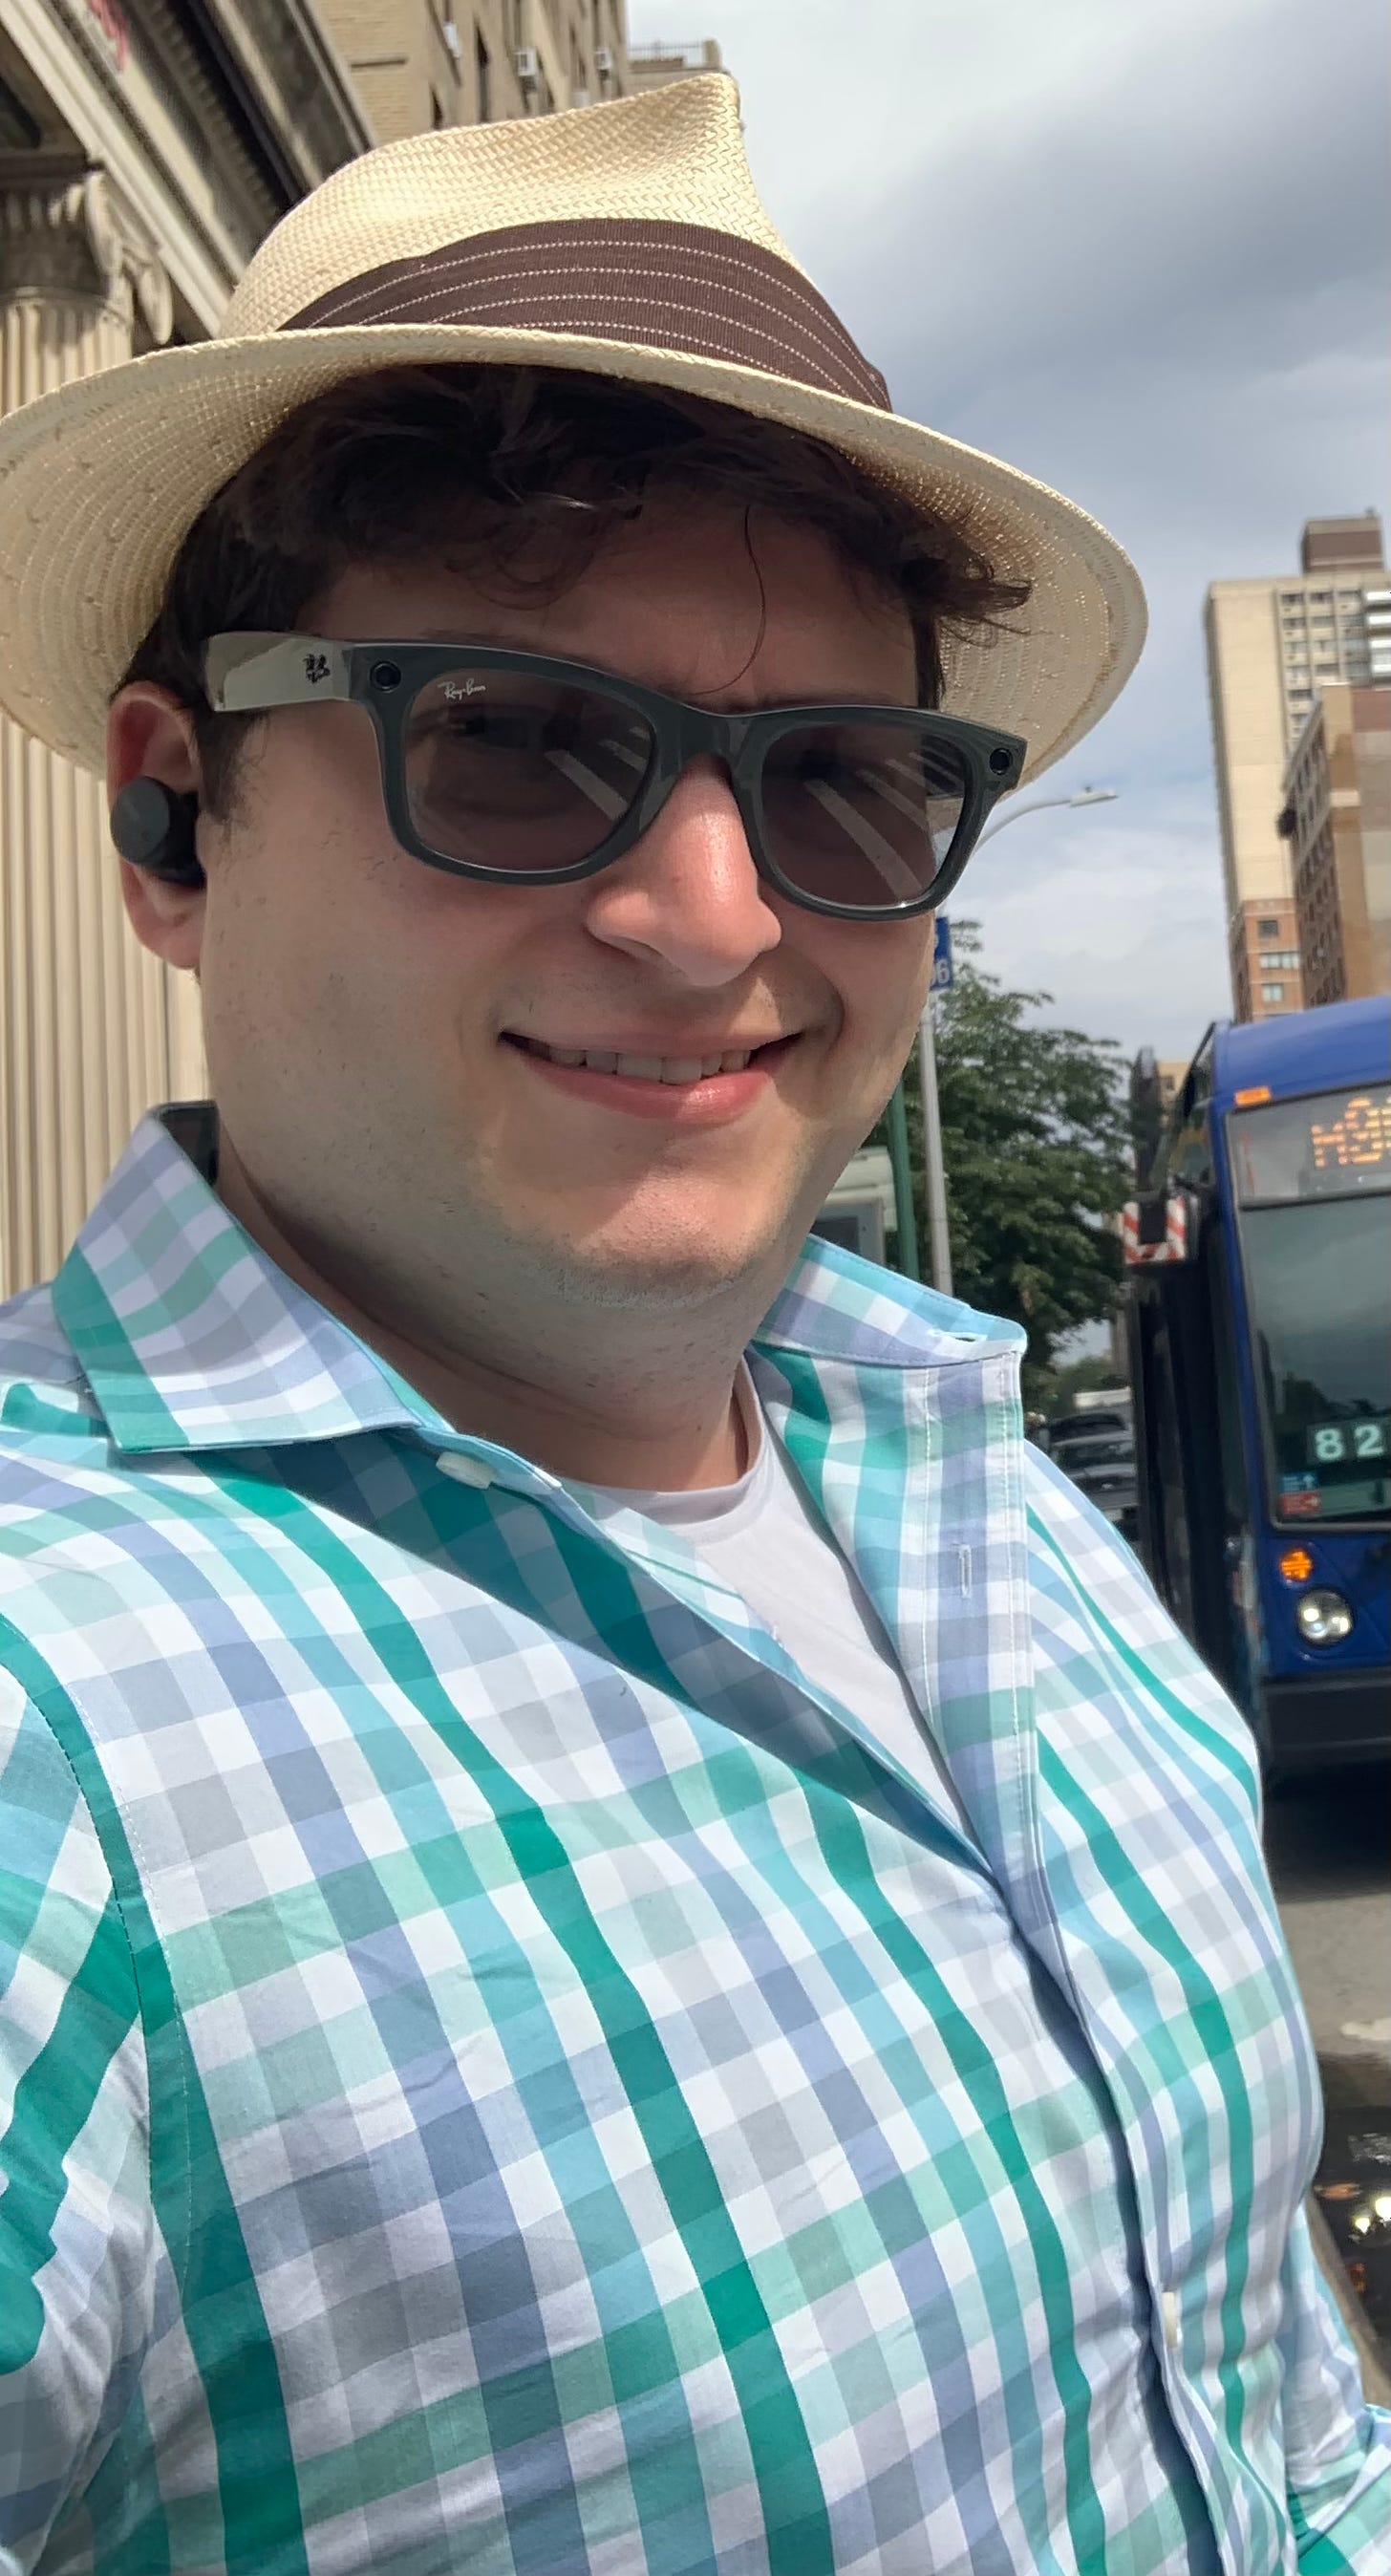 Image is me, a light-skinned, male-presenting individual, sort of smiling and sort of squinting out on a street in New York City. I am visible from the chest up, and I'm wearing a collared, button-down shirt with a plaid pattern that has crisscrossing lines of teal, blue, and grey. I am also wearing grey-framed Ray-Ban wayfarer sunglasses and a white panama hat with a brown band.